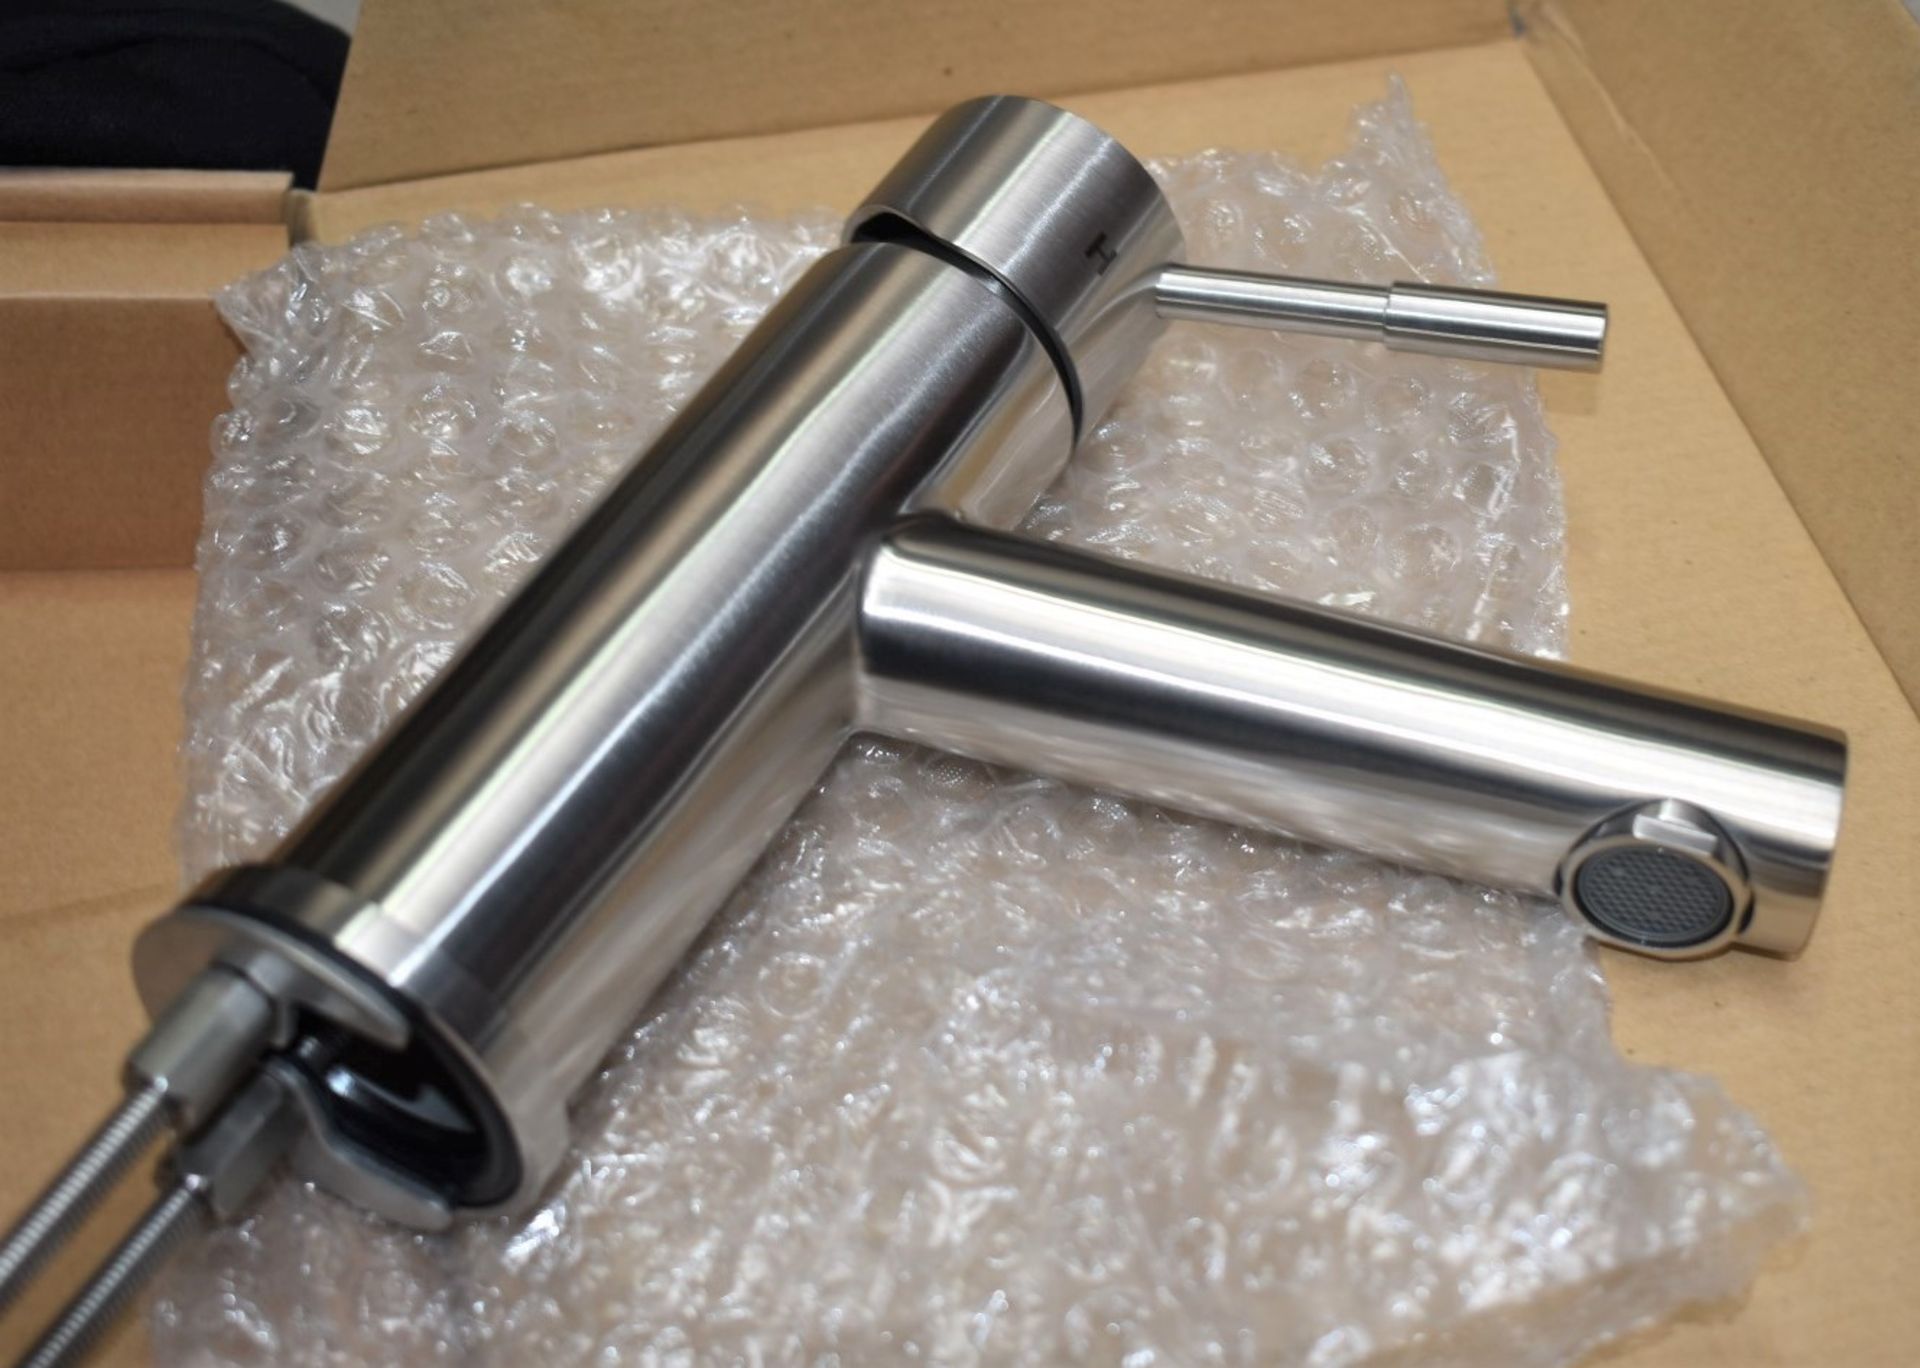 1 x Stonearth 'Hali' Stainless Steel Basin Mixer Tap - Brand New & Boxed - RRP £245 - Ref: TP801 WH2